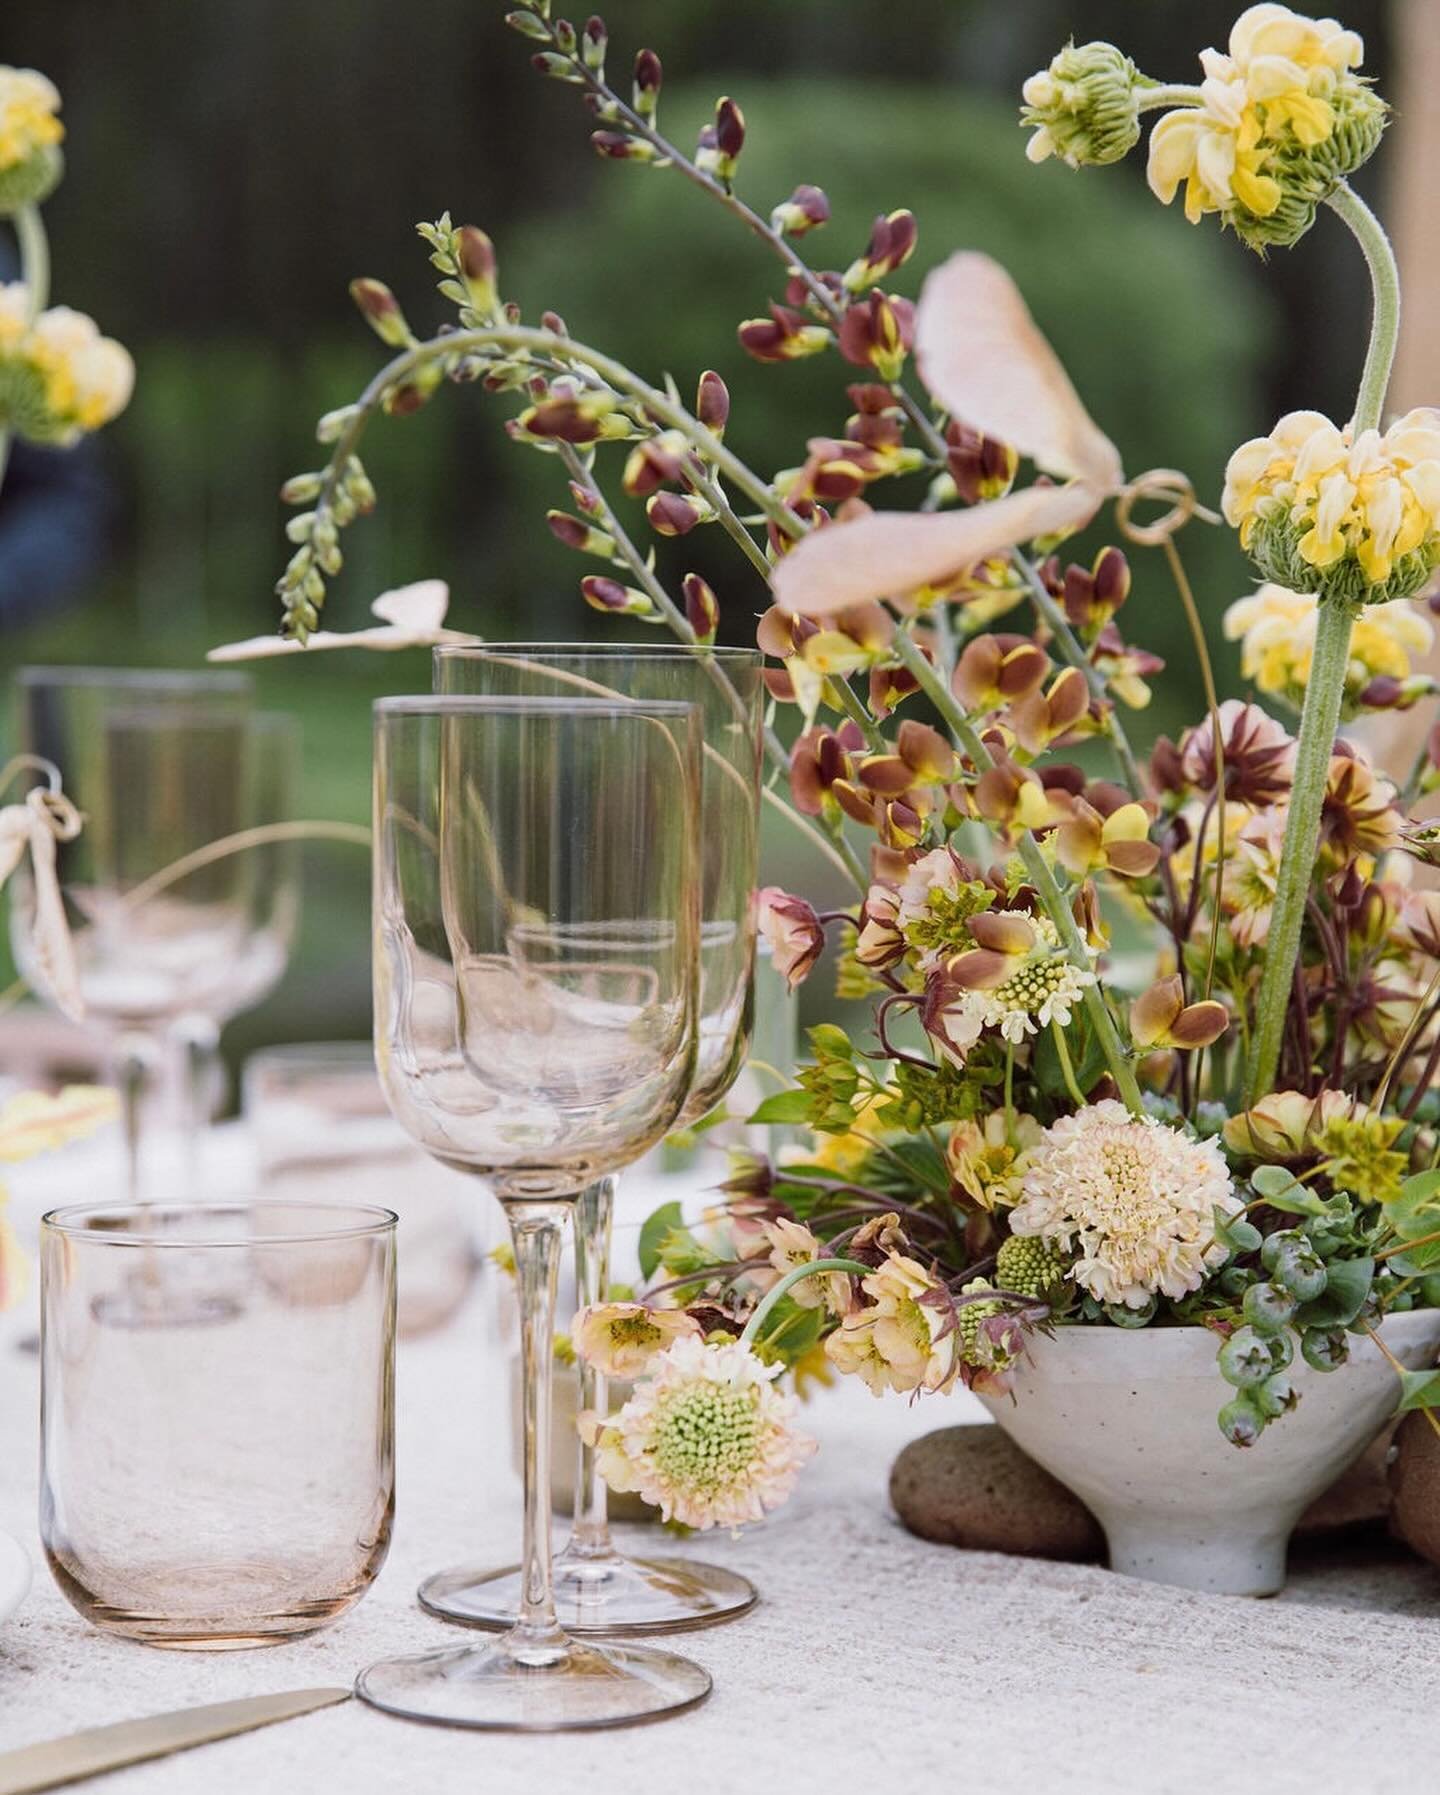 HELLO SPRING.

Spring has sprung from every angle&mdash;yellow floral accents and tablescapes blooming in a meadow, where the views alone are worth pausing to admire. Add some gold accents and cozy lounging areas, and you&rsquo;ve crafted an event ev